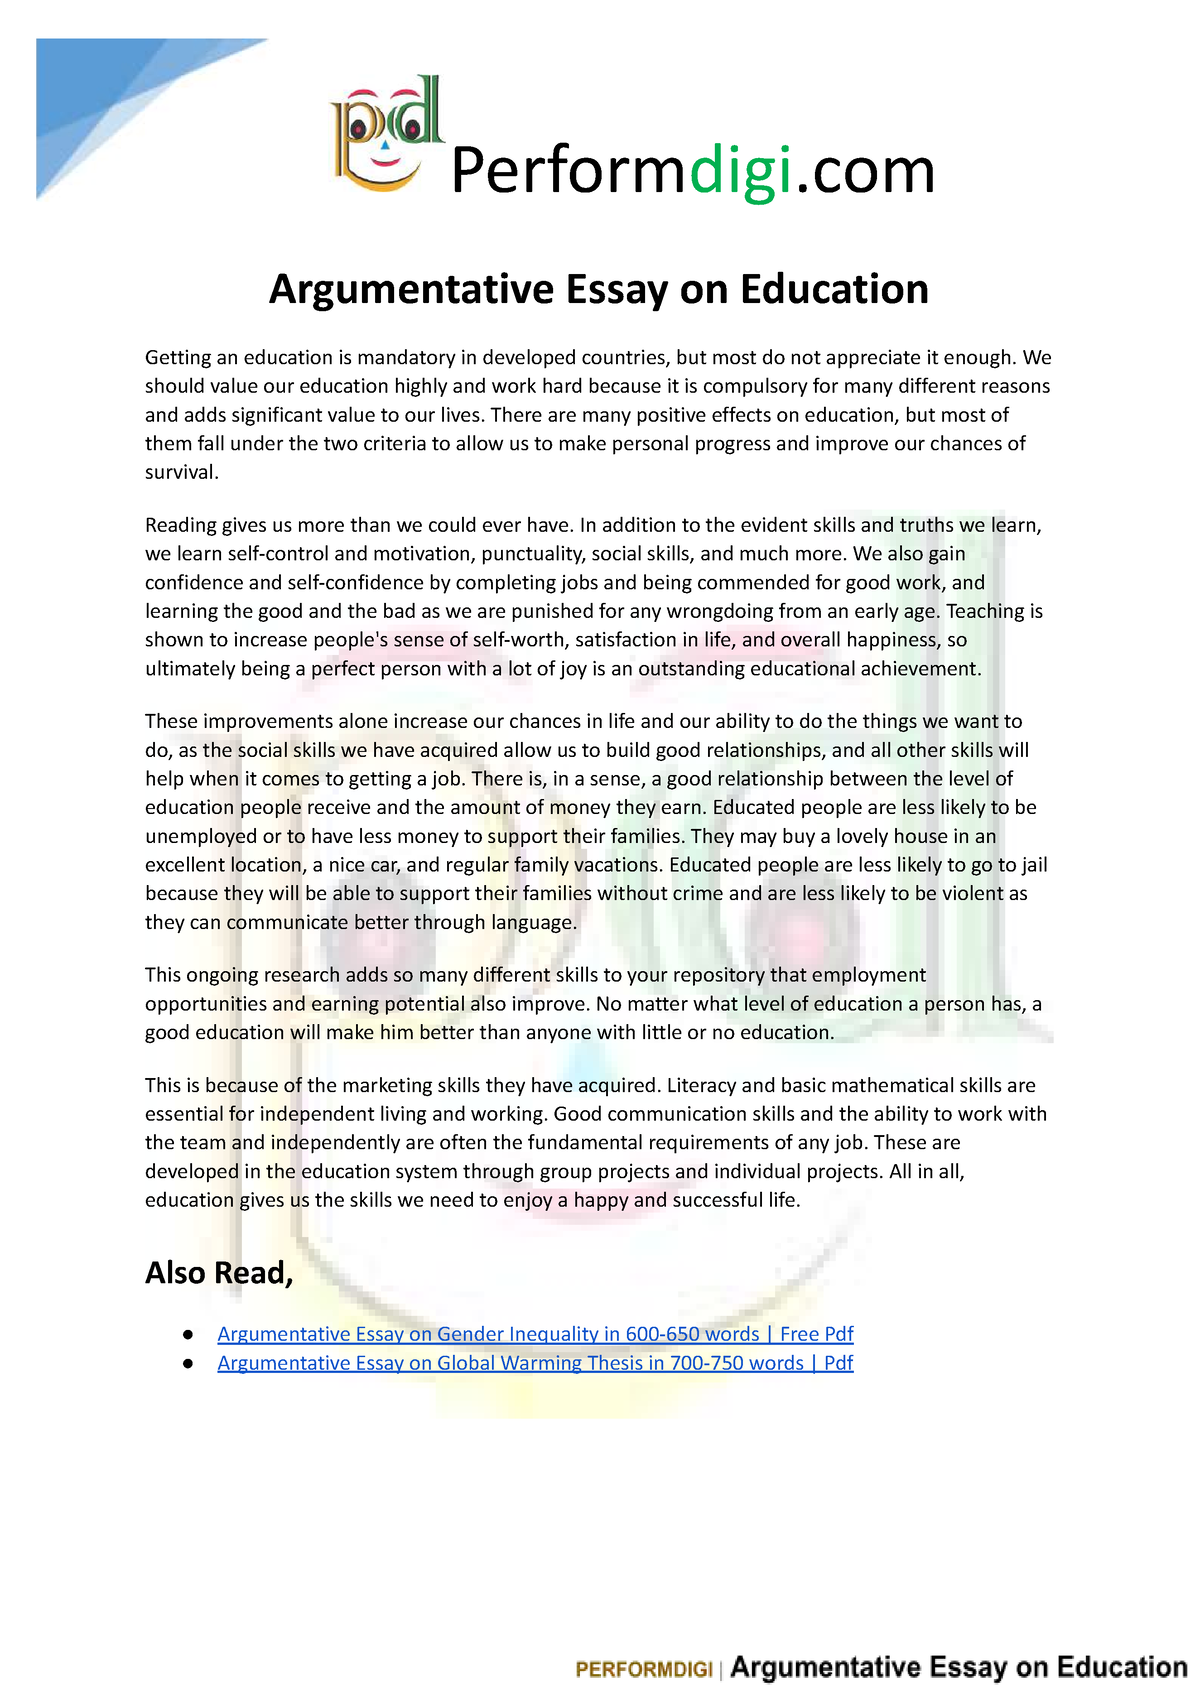 argumentative essay on education is the best legacy